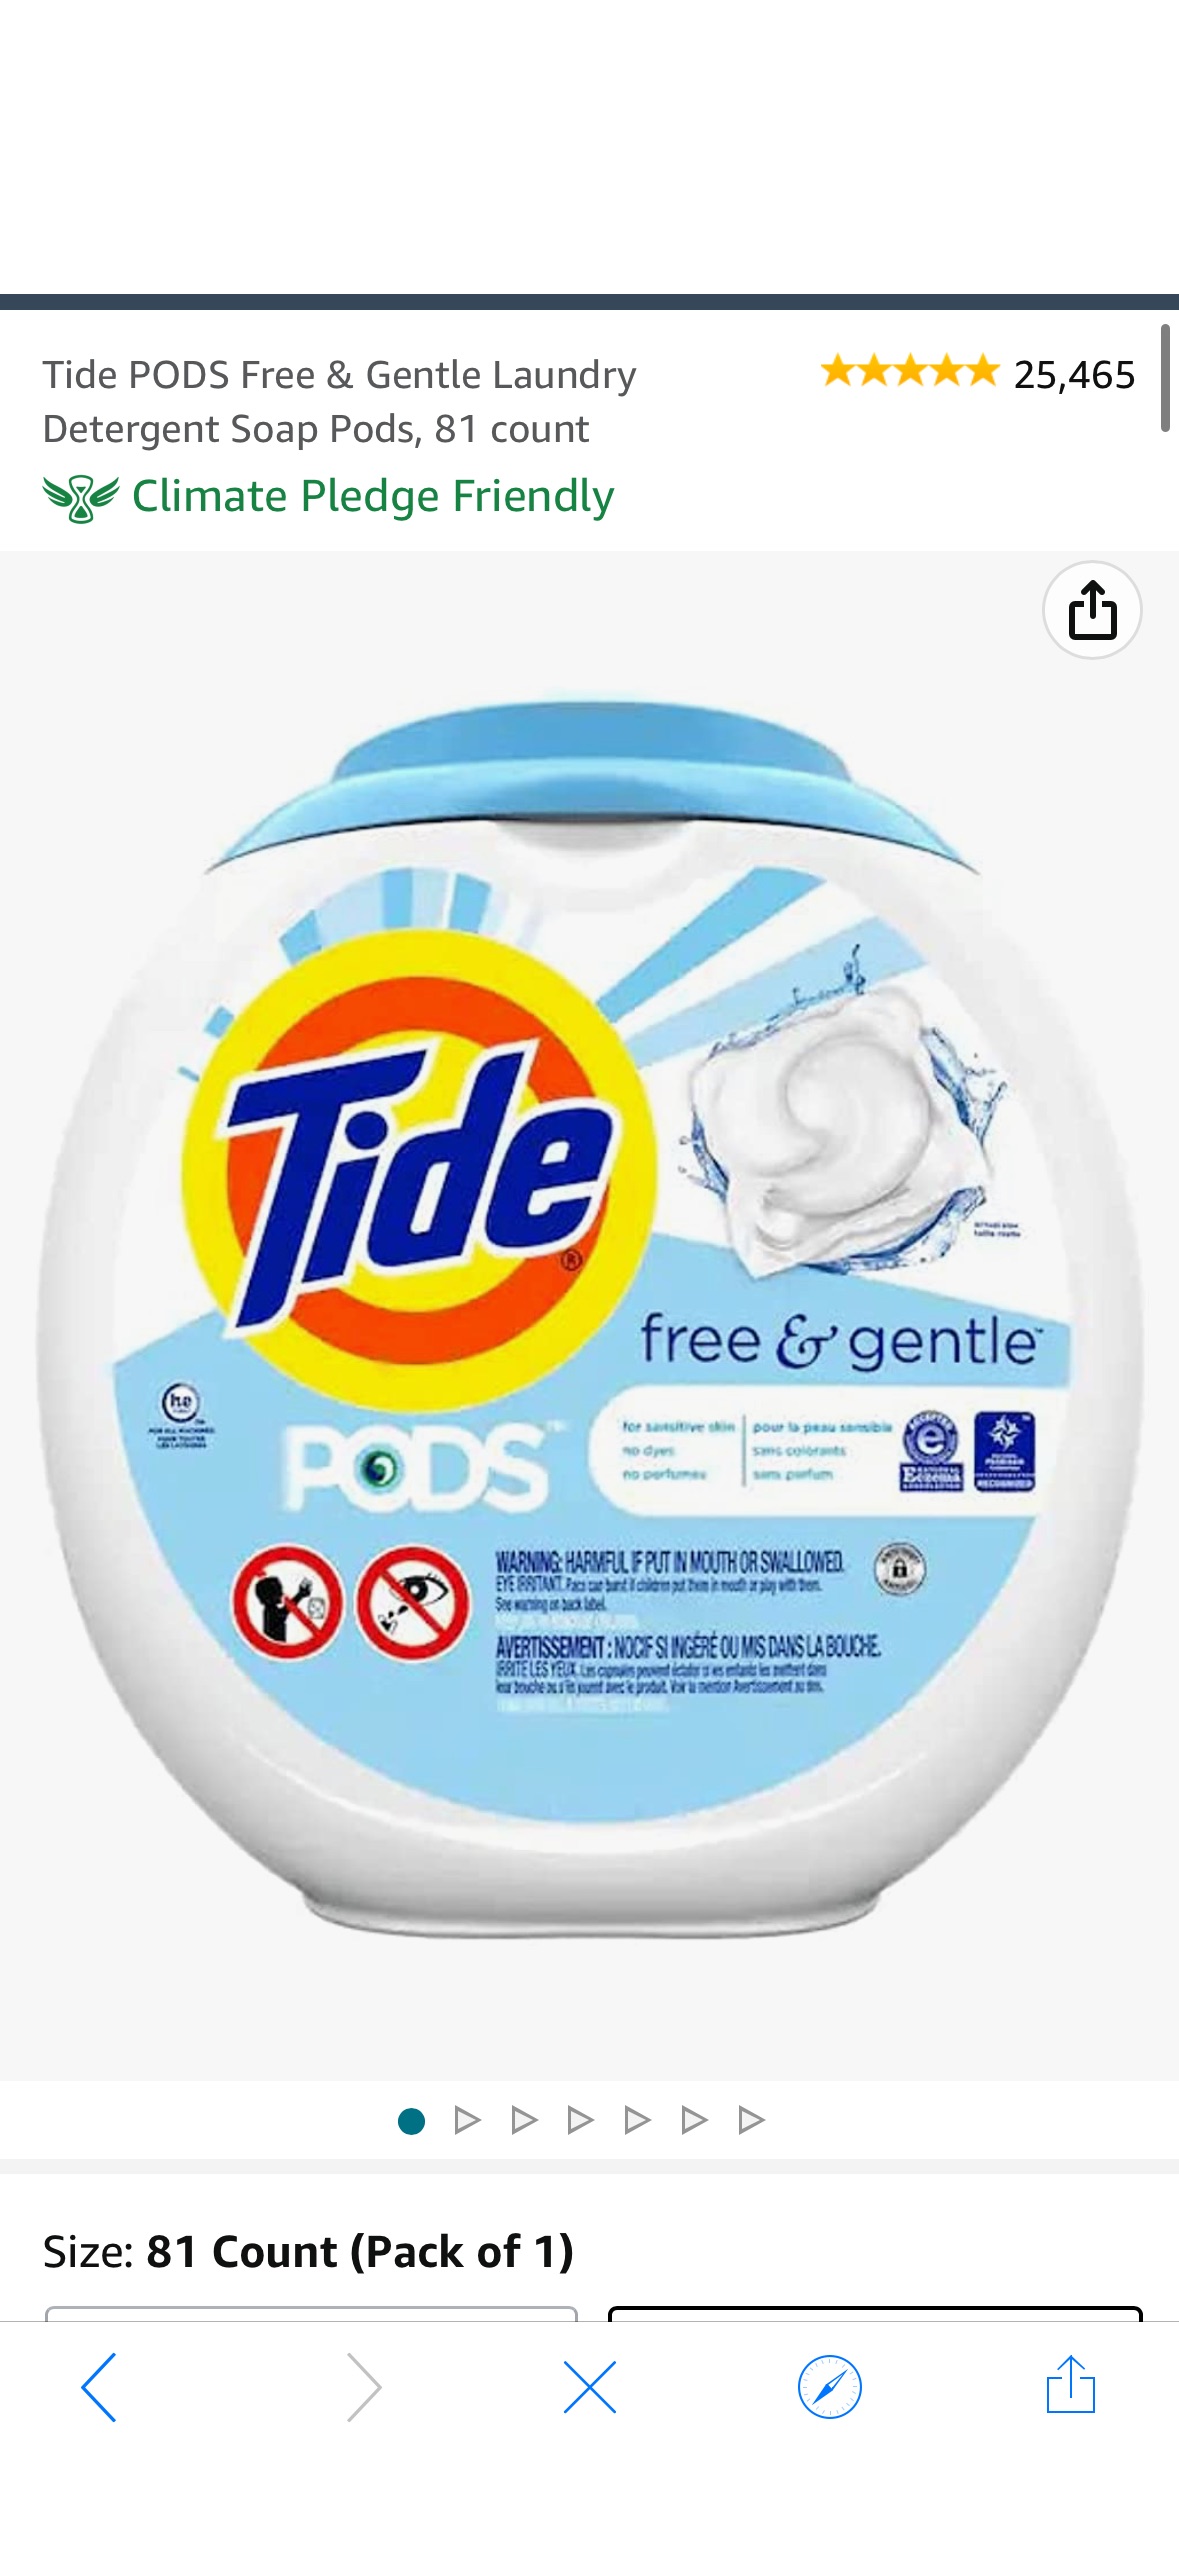 Amazon.com: Tide PODS Free & Gentle Laundry Detergent Soap Pods, 81 count : Clothing, Shoes & Jewelry洗衣球